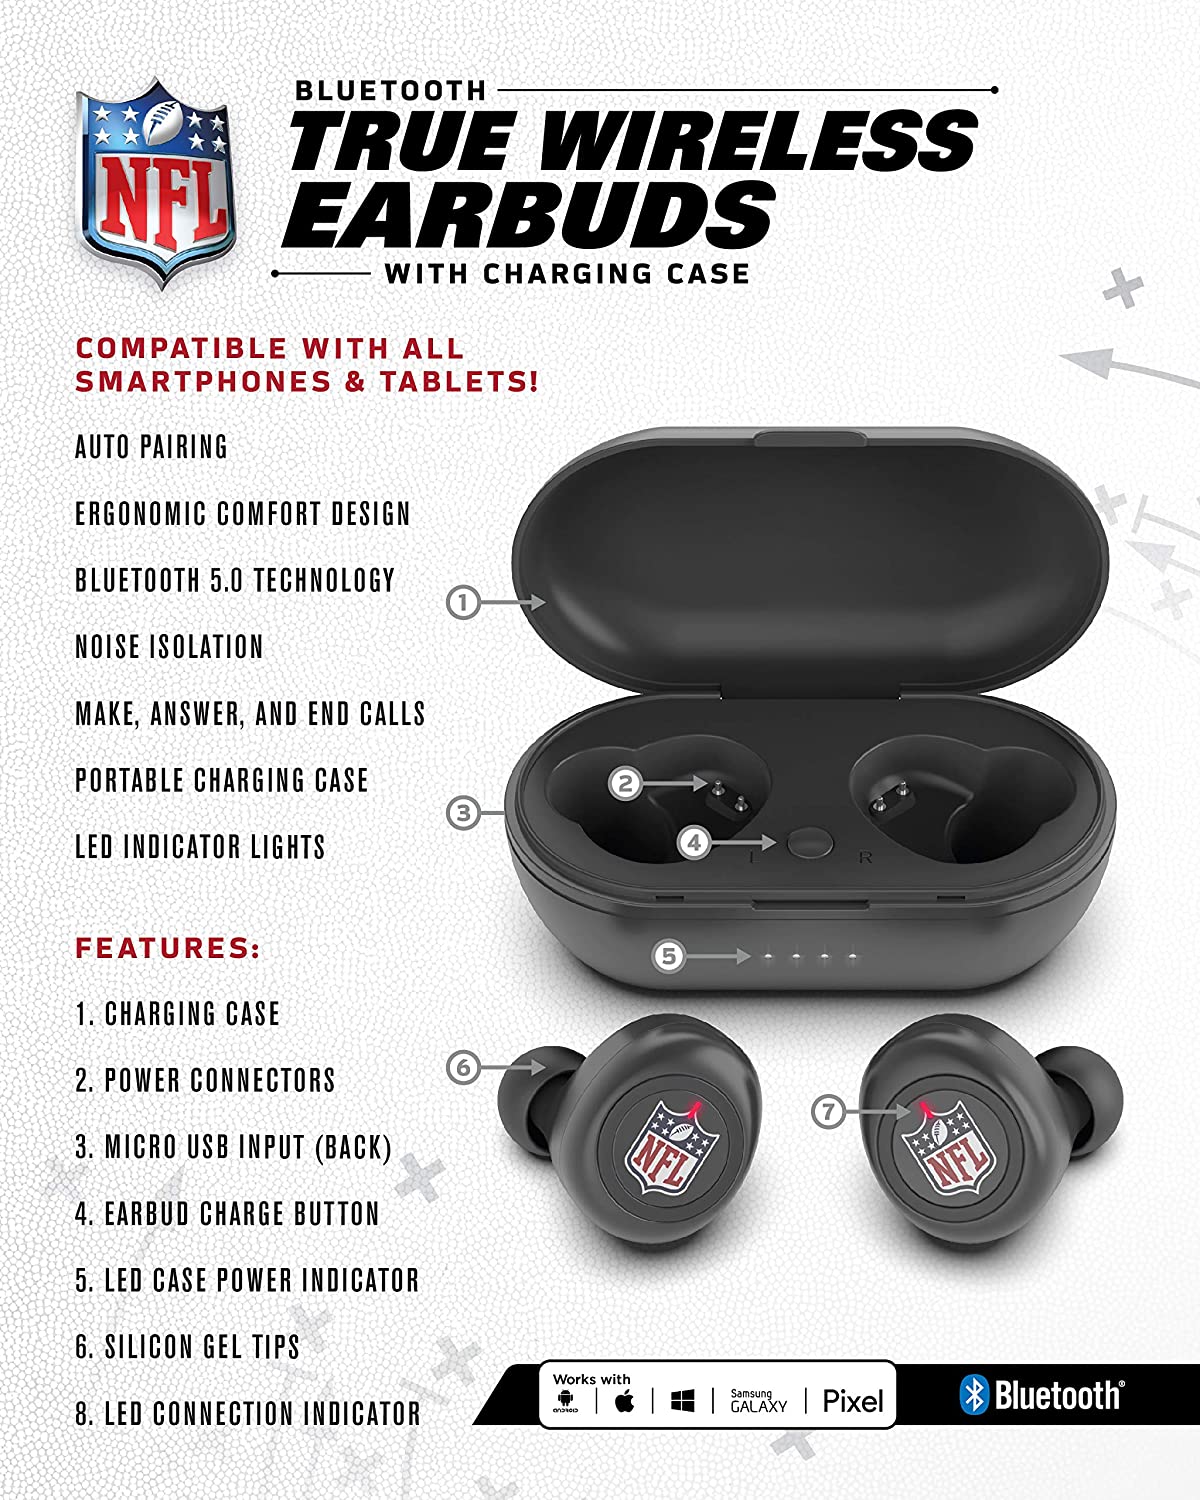 Detroit Lions True Wireless Bluetooth Earbuds w/Charging Case by Prime Brands